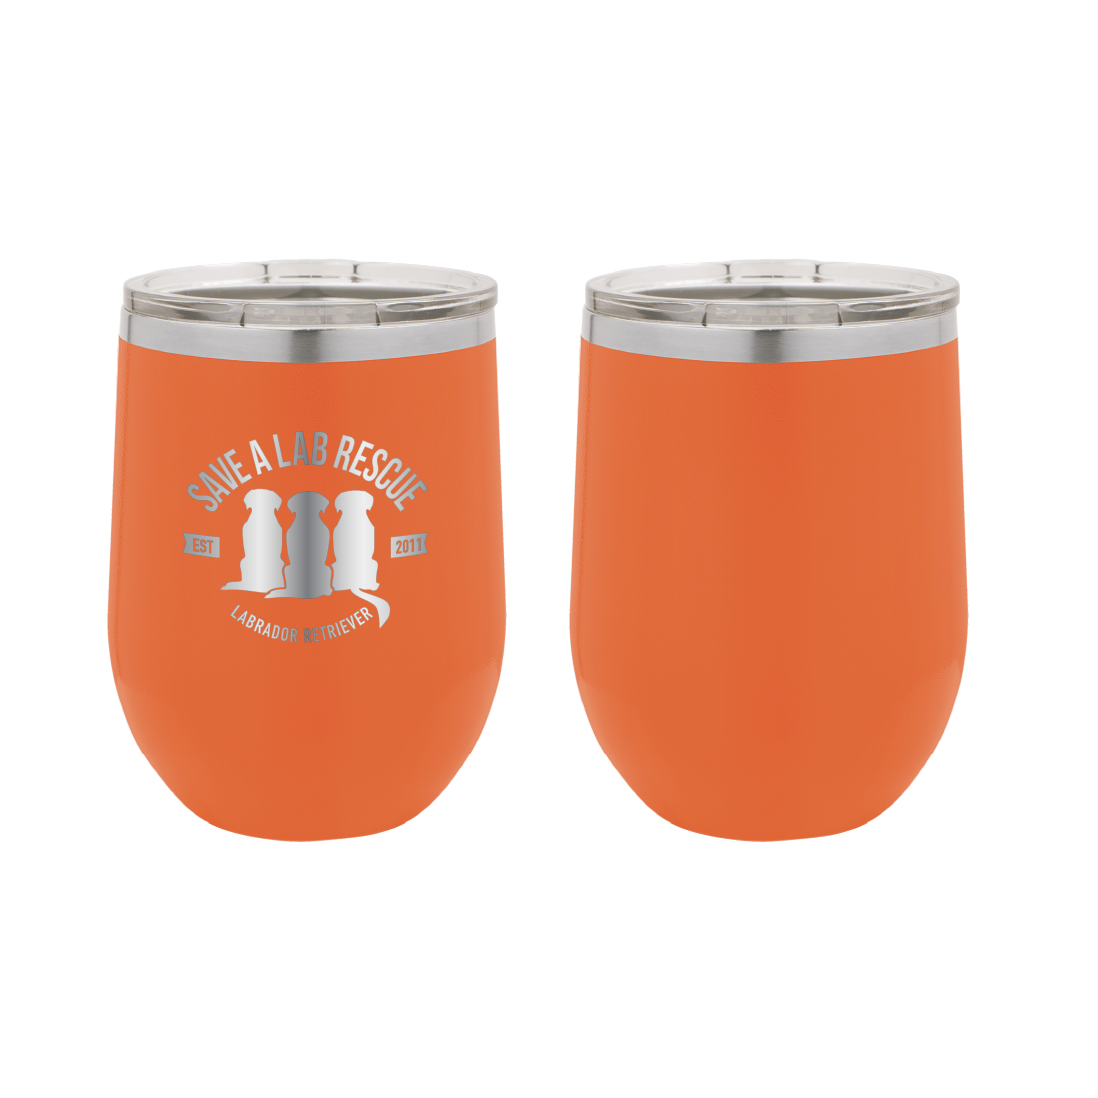 12 oz Wine Tumbler, laser engraved gift for mom's, dads and dog lovers. Orange tumbler with the Save A Lab logo.